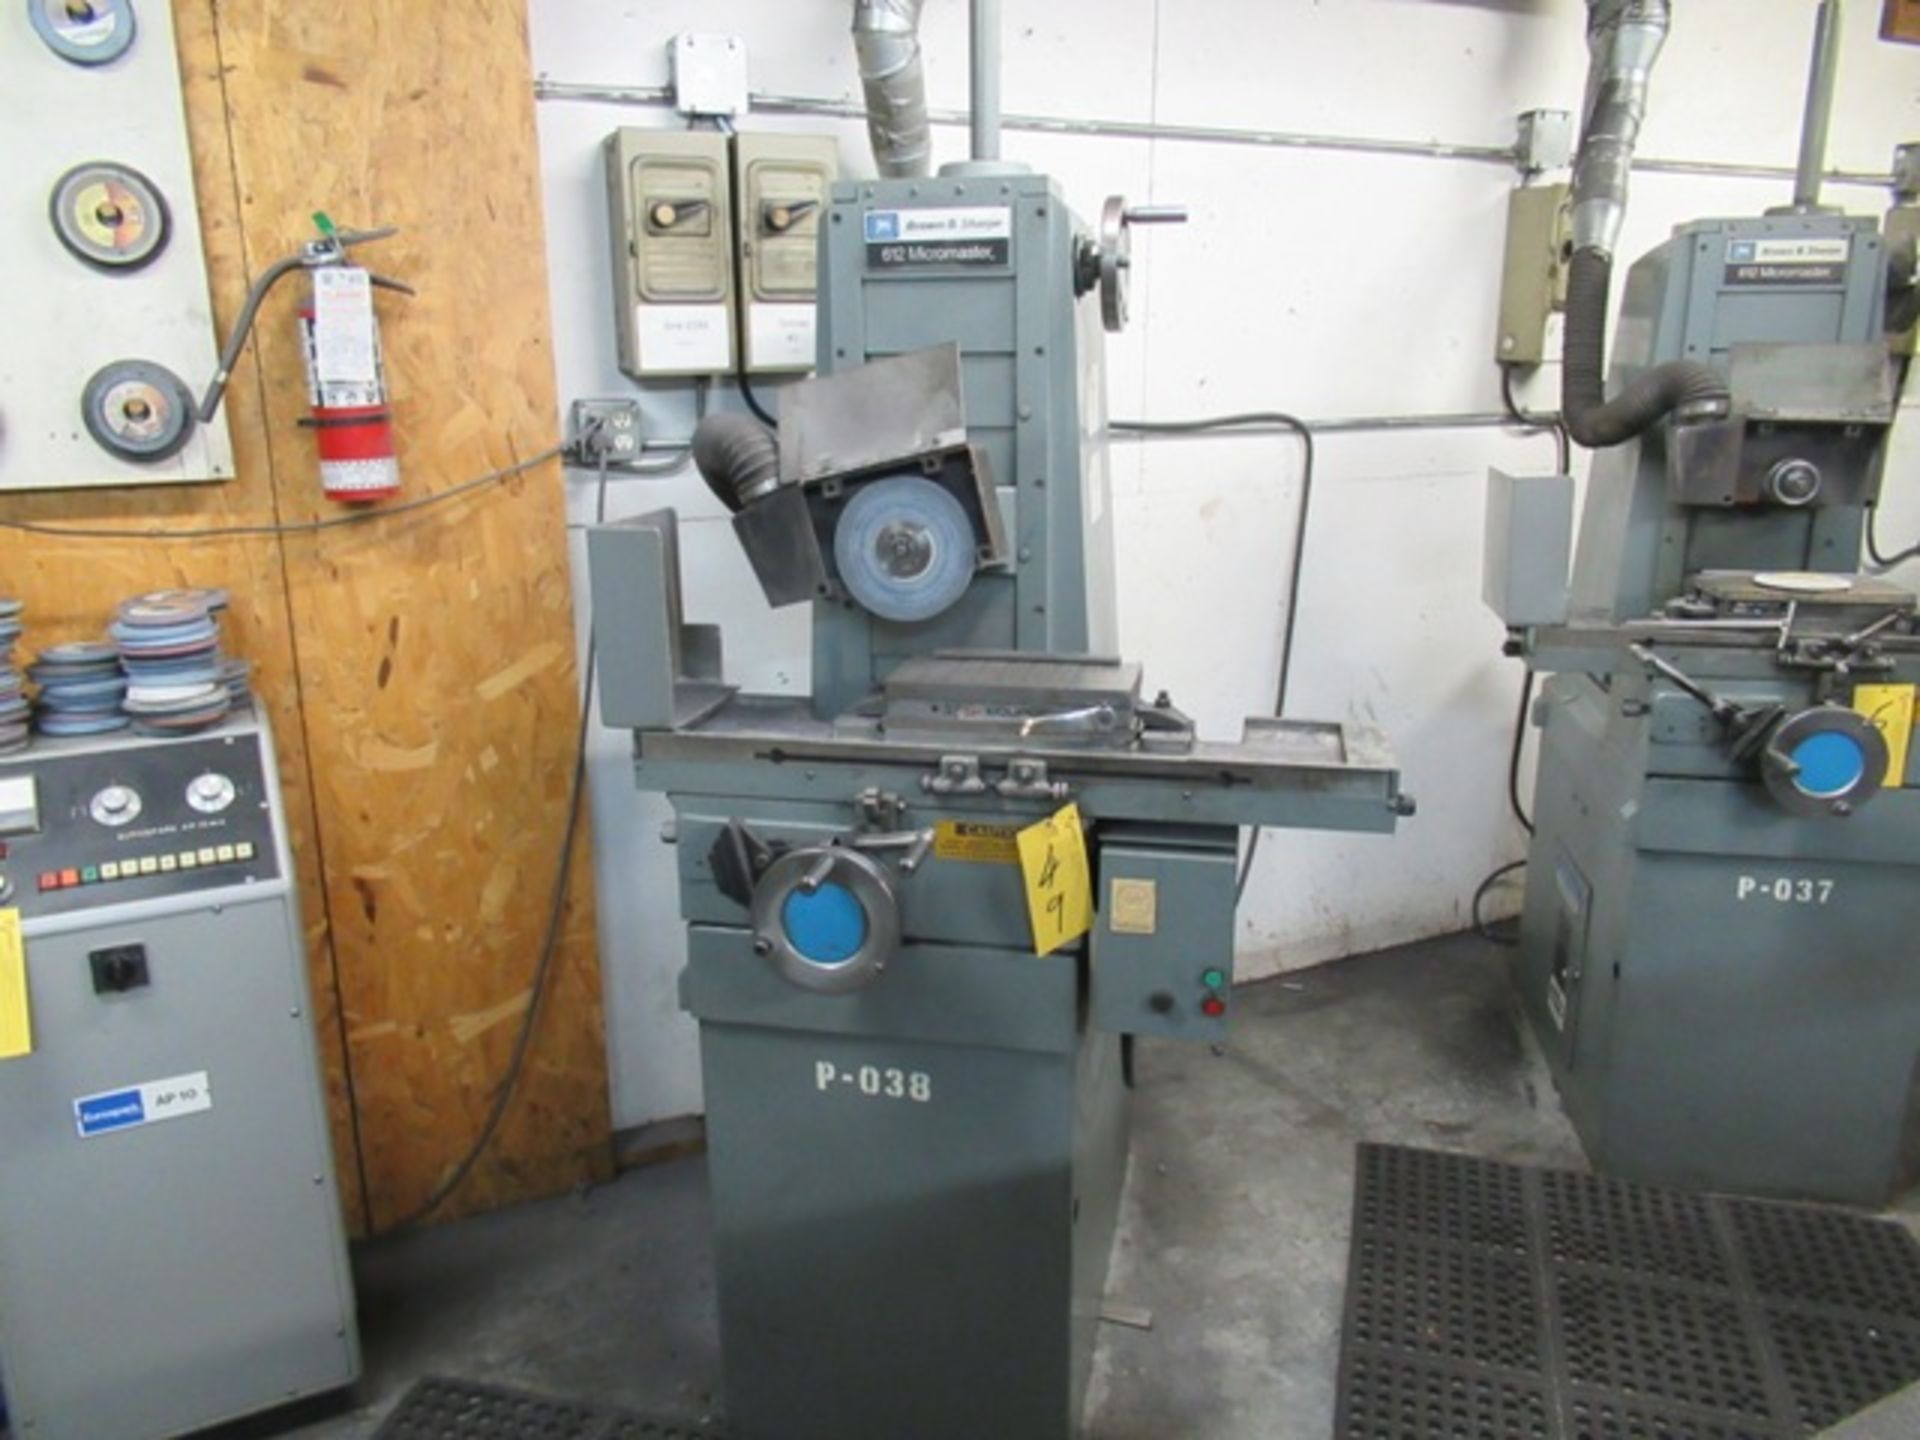 BROWN + SHARPE 612 MICRO MASTER 6"X12" MANUAL SURFACE GRINDER W/ECLIPSE 6X12 MAGNETIC CHUCK, SN